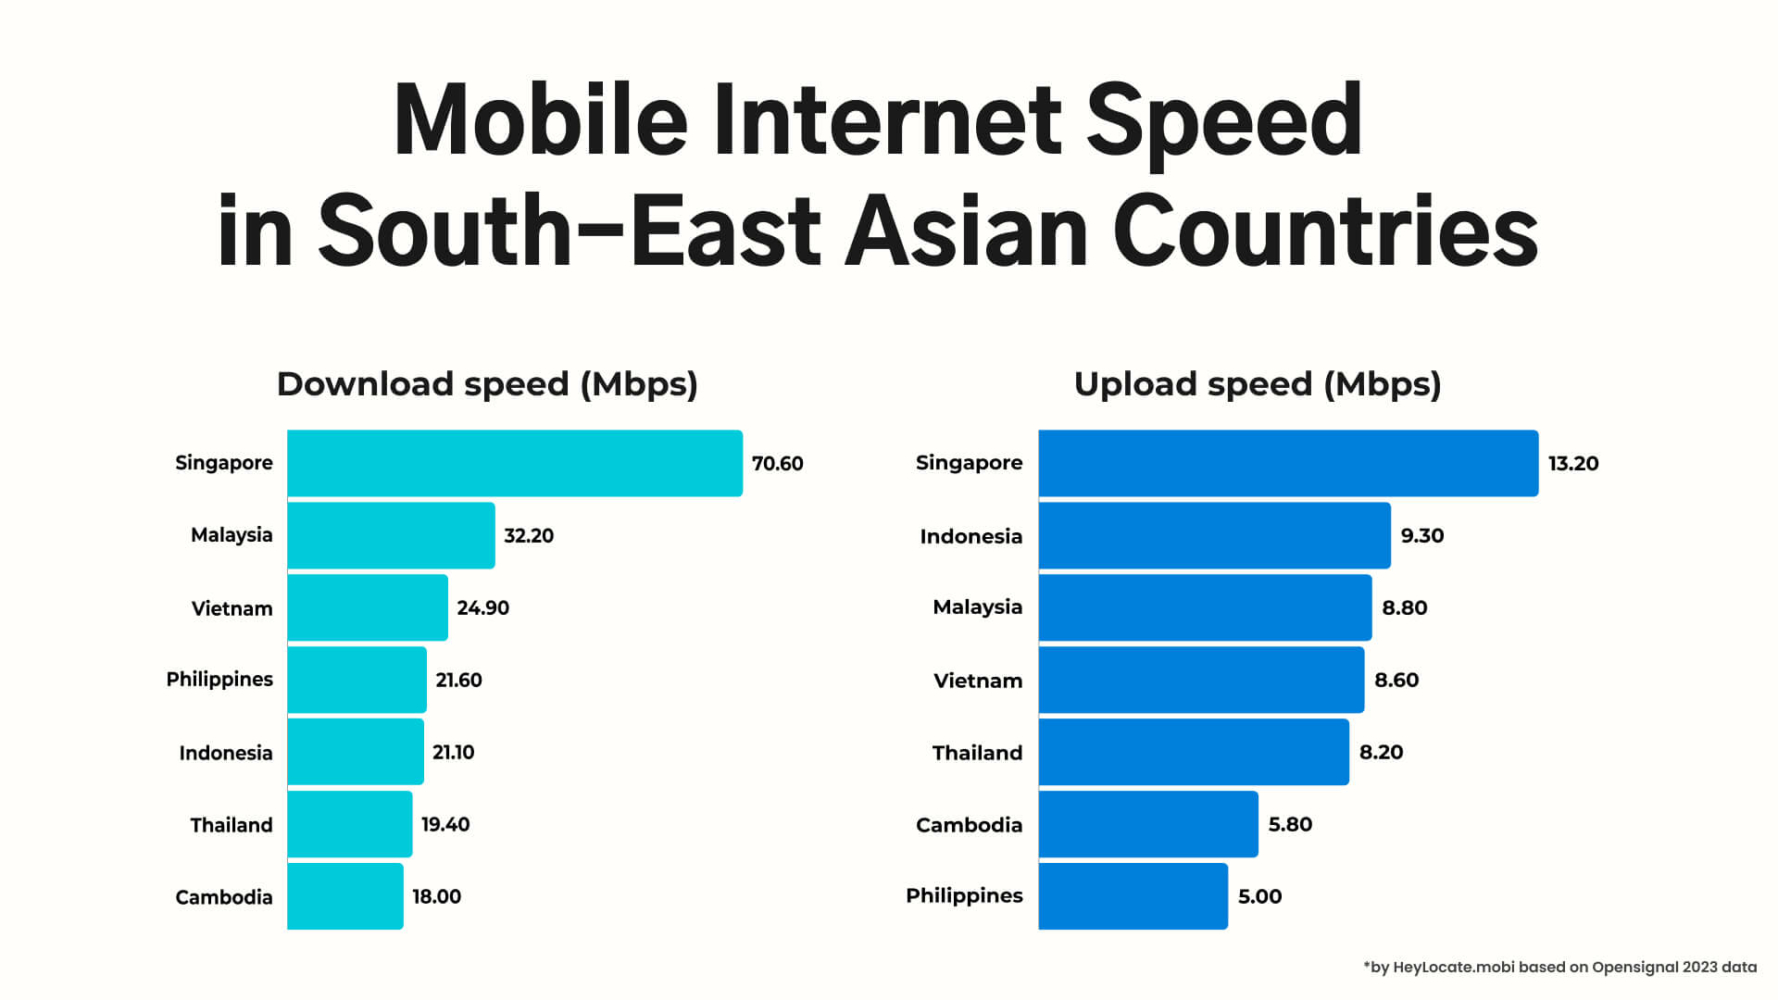 An infographic by HeyLocate.mobi titled "Mobile Internet Speed in South-East Asian Countries," which compares the download and upload speeds (in Mbps) of mobile internet across various countries. 